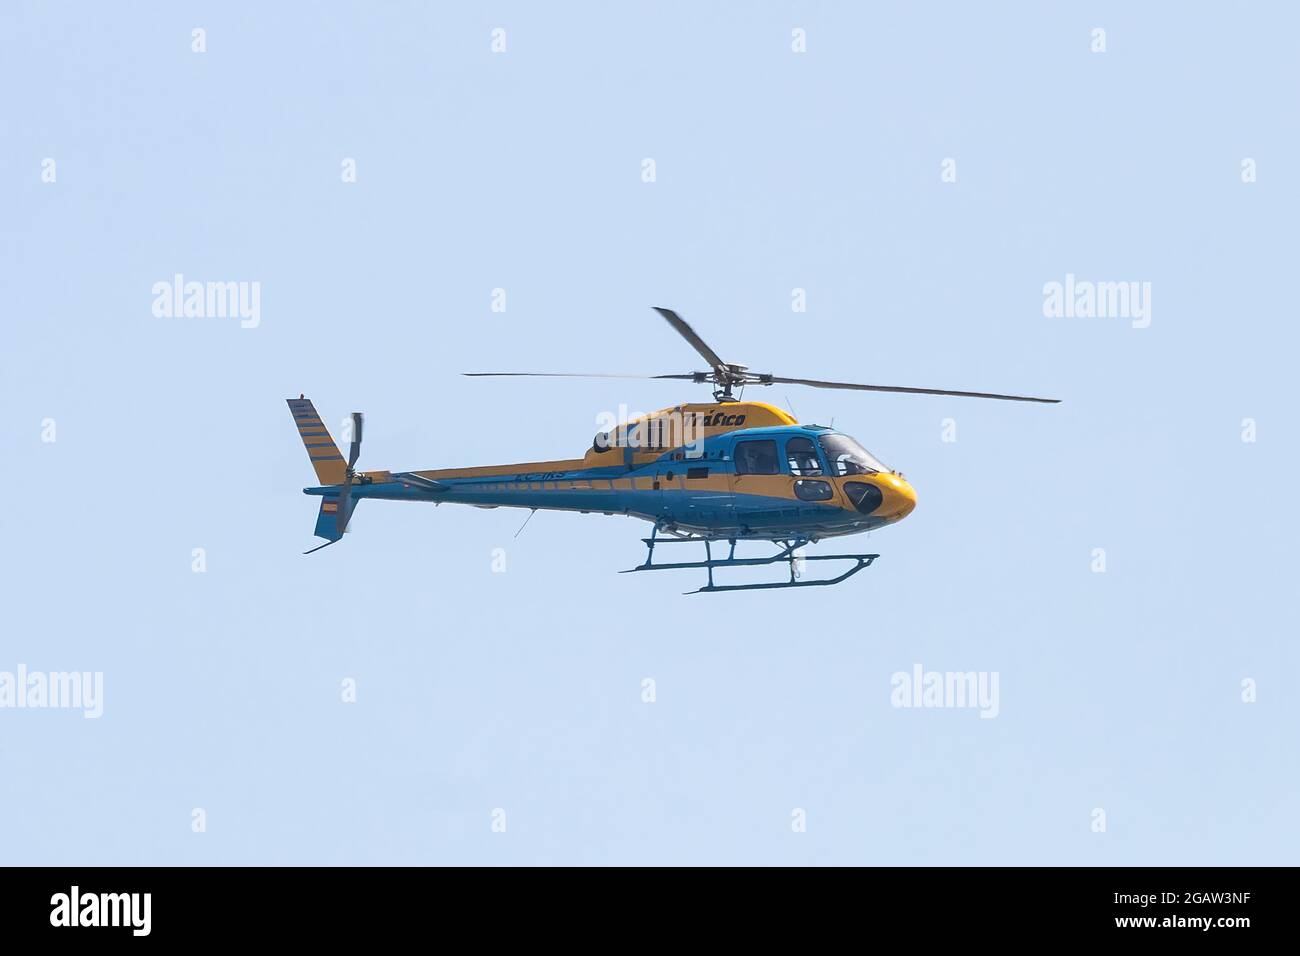 Huelva, Spain - July 30, 2021: Helicopter of the Guardia Civil de Trafico (Civil Traffic Guard) patrolling the roads and highways to control reckless Stock Photo